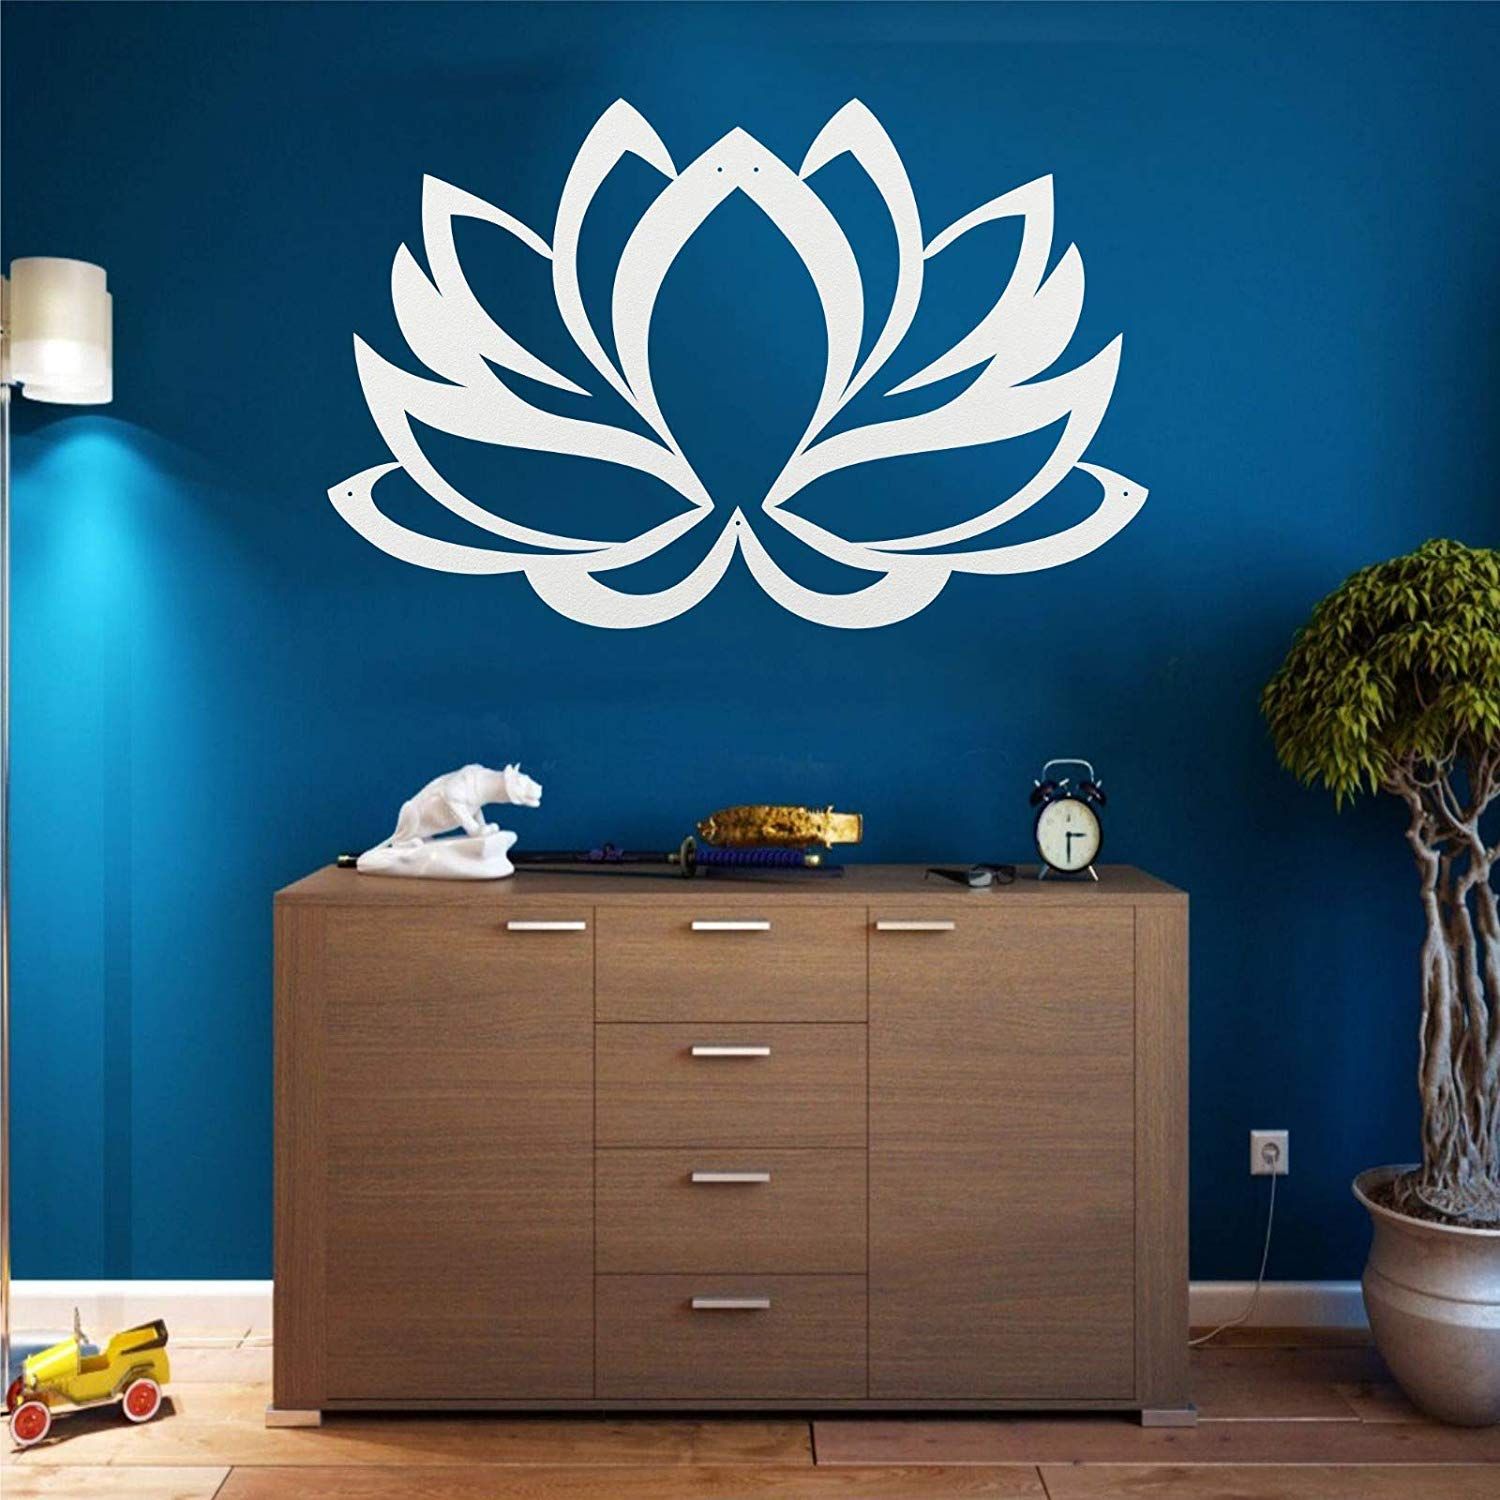 Lamodahome Metal Wall Art, Metal Lotus Flower Art White, Wall Intended For Sparks Metal Wall Art (View 15 of 15)